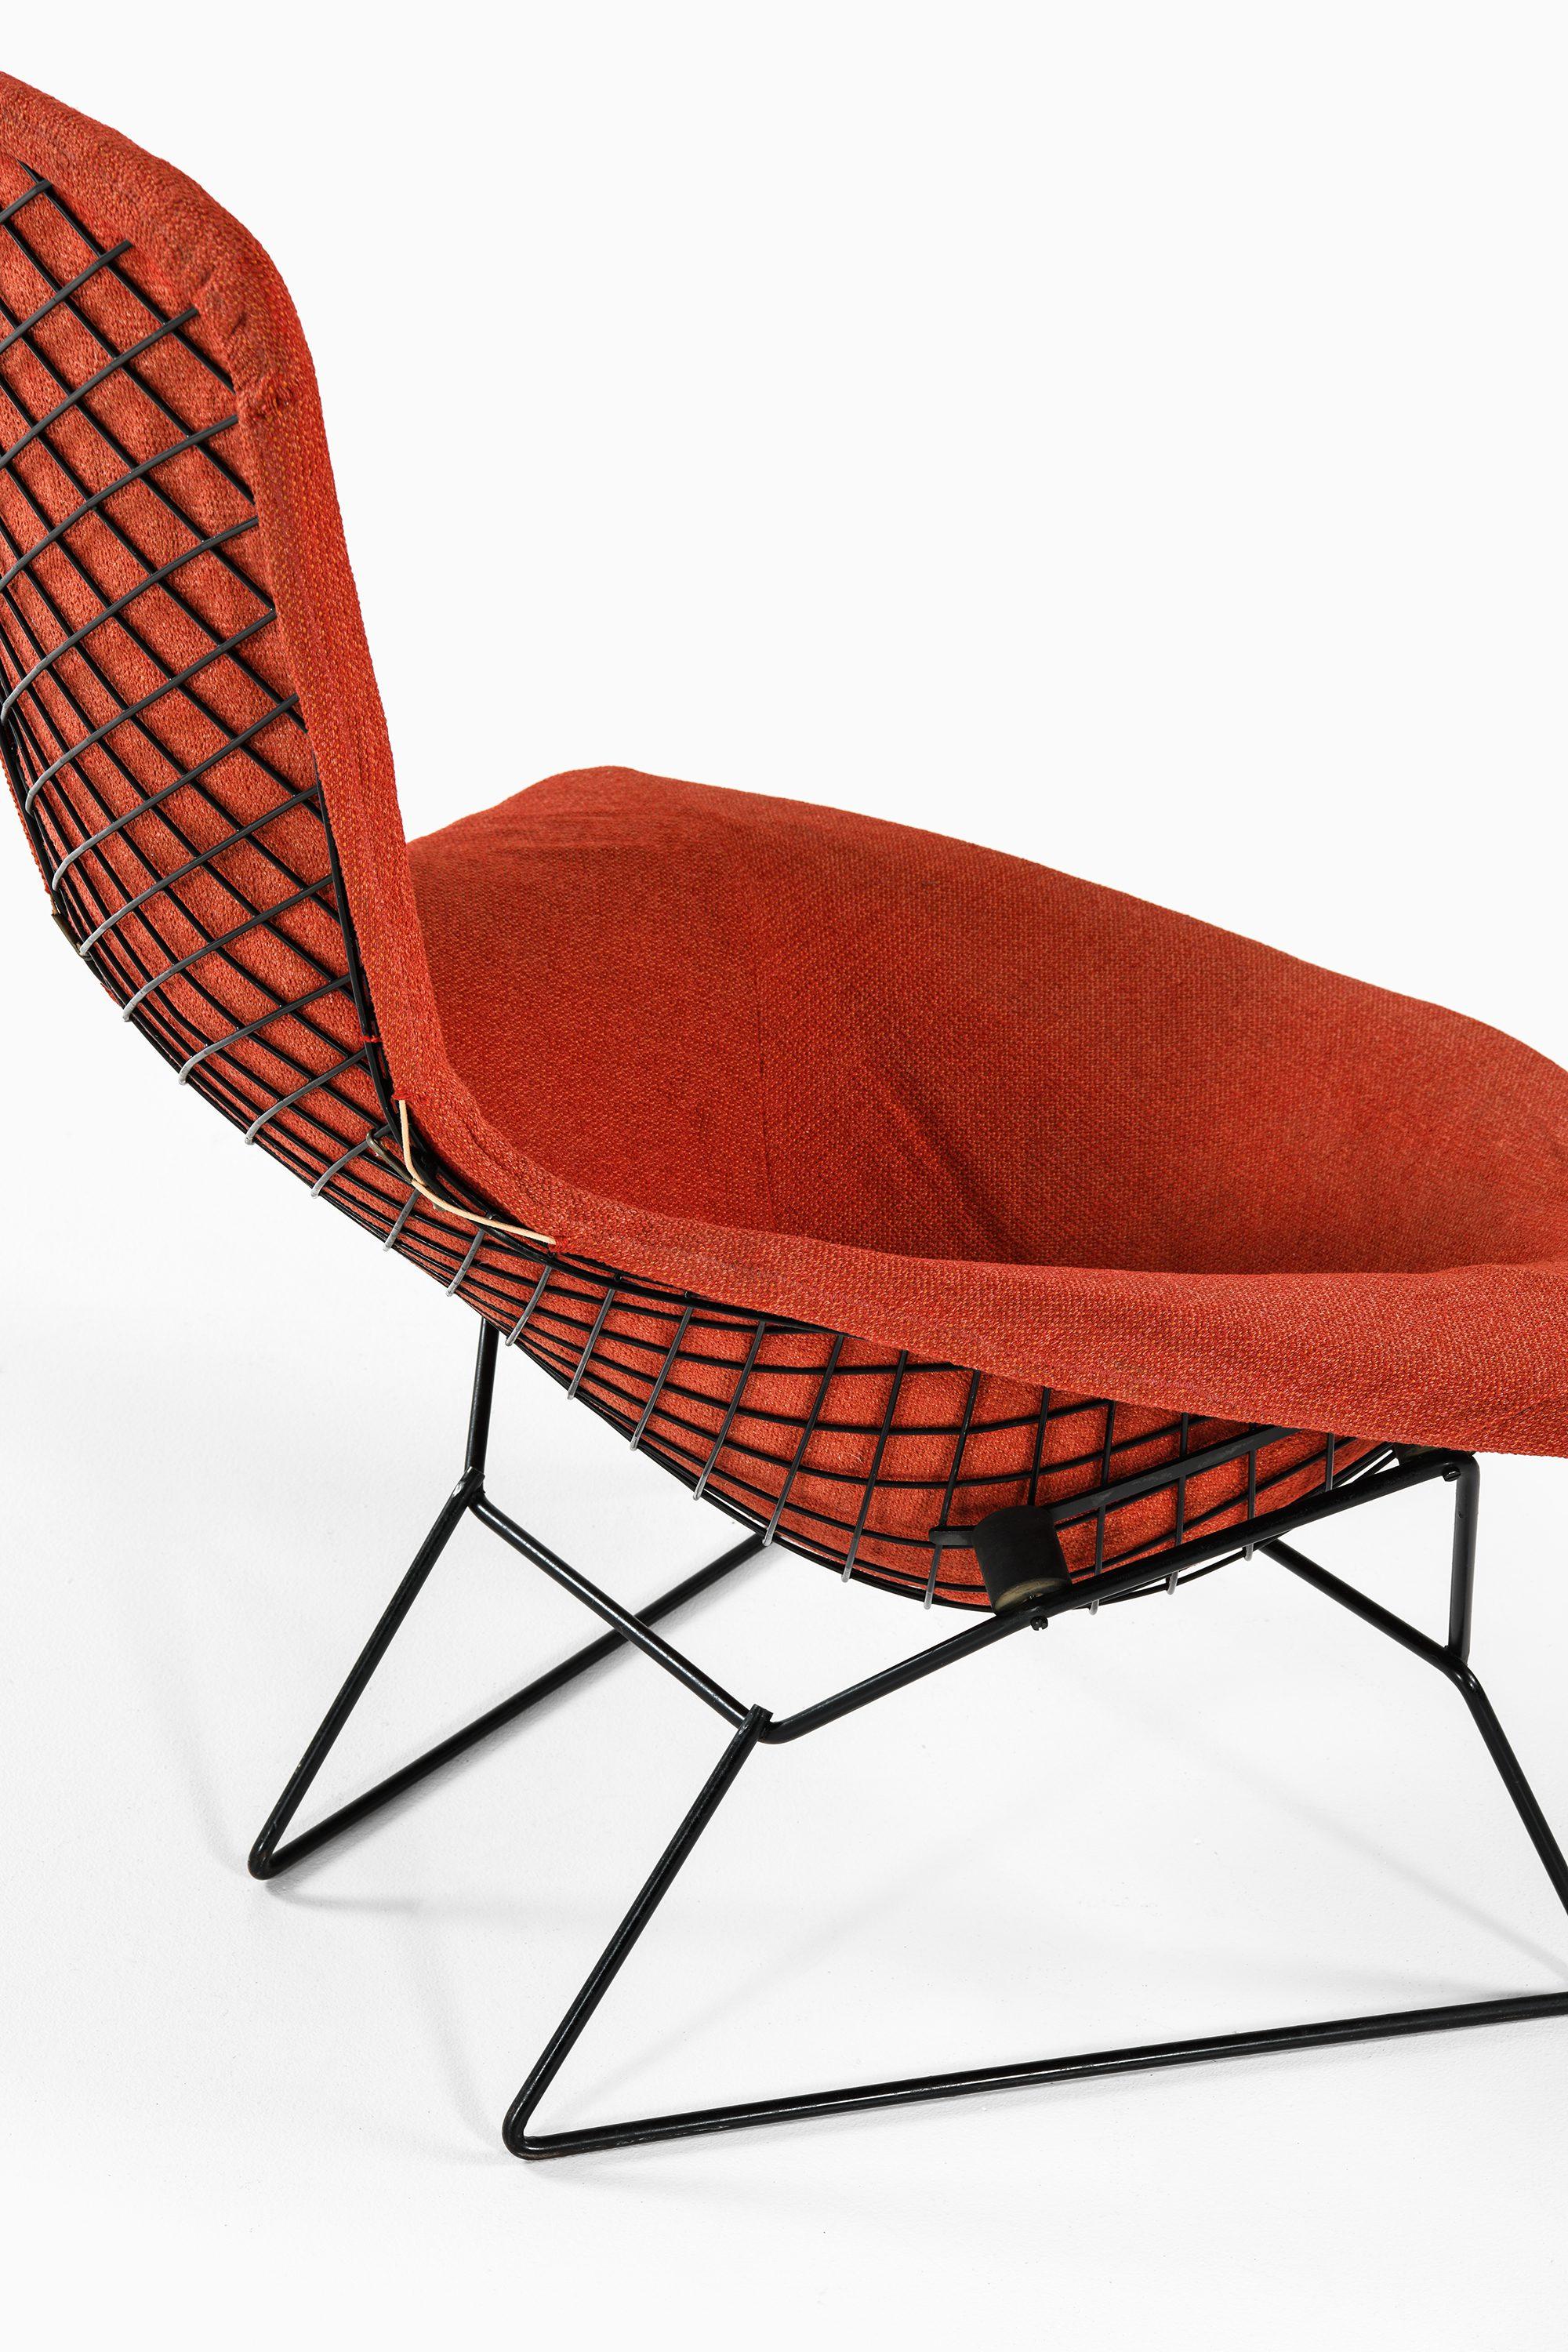 20th Century Easy Bird Chair in Black Lacquered Metal and Red Fabric by Harry Bertoia, 1950s For Sale